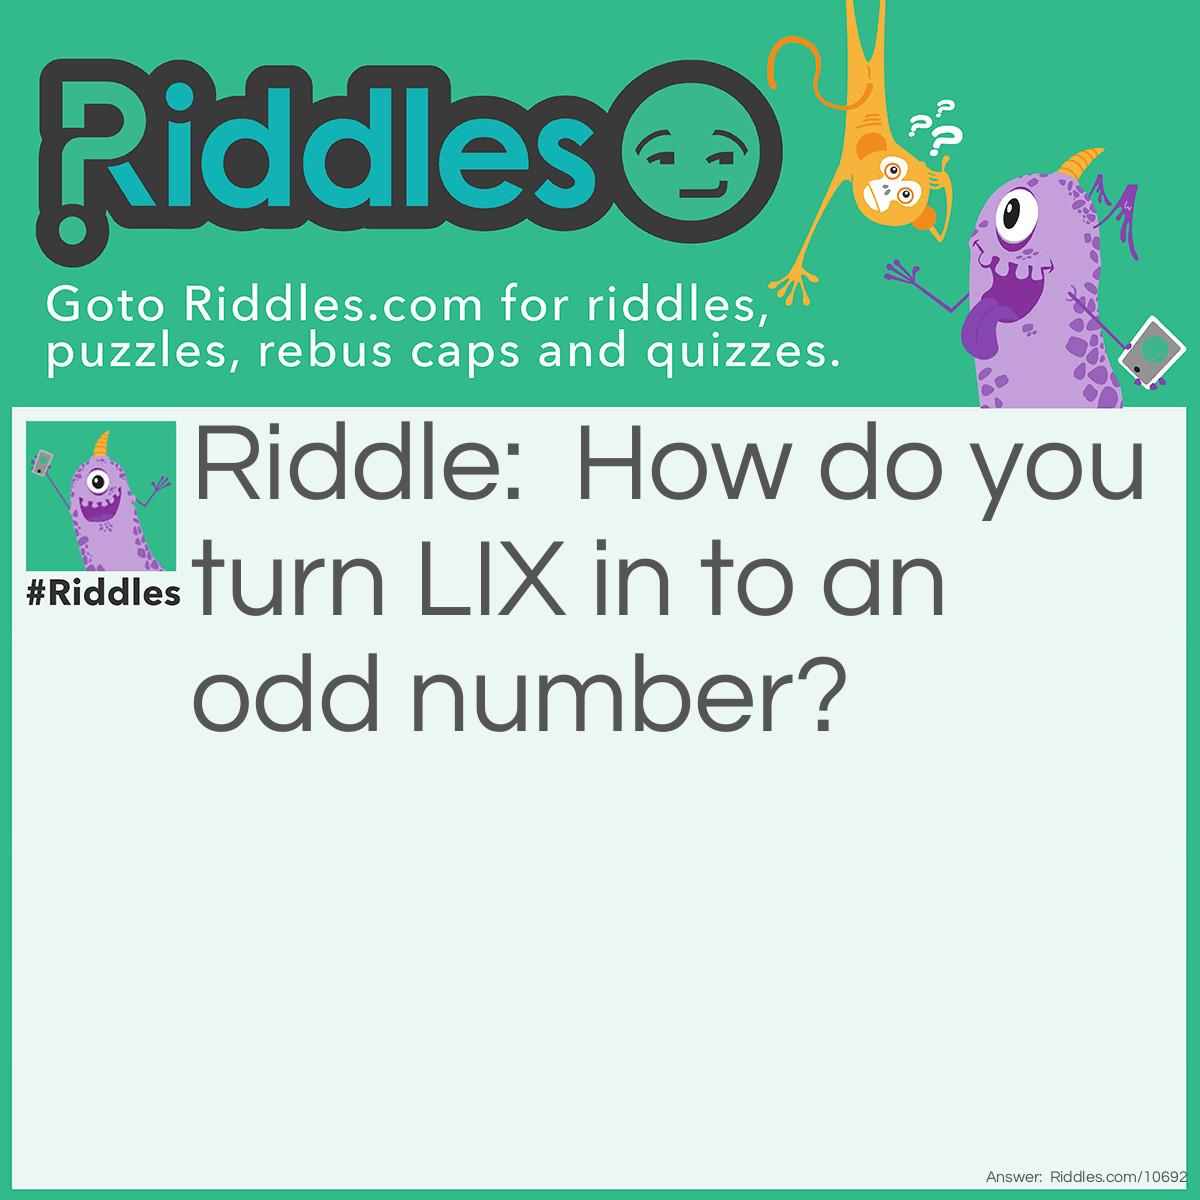 Riddle: How do you turn LIX in to an odd number? Answer: L in roman numerals is 50, I in roman numerals is 1, X in roman numerals is 10. 50 + 1 + 10 = 61 61 is an odd number.